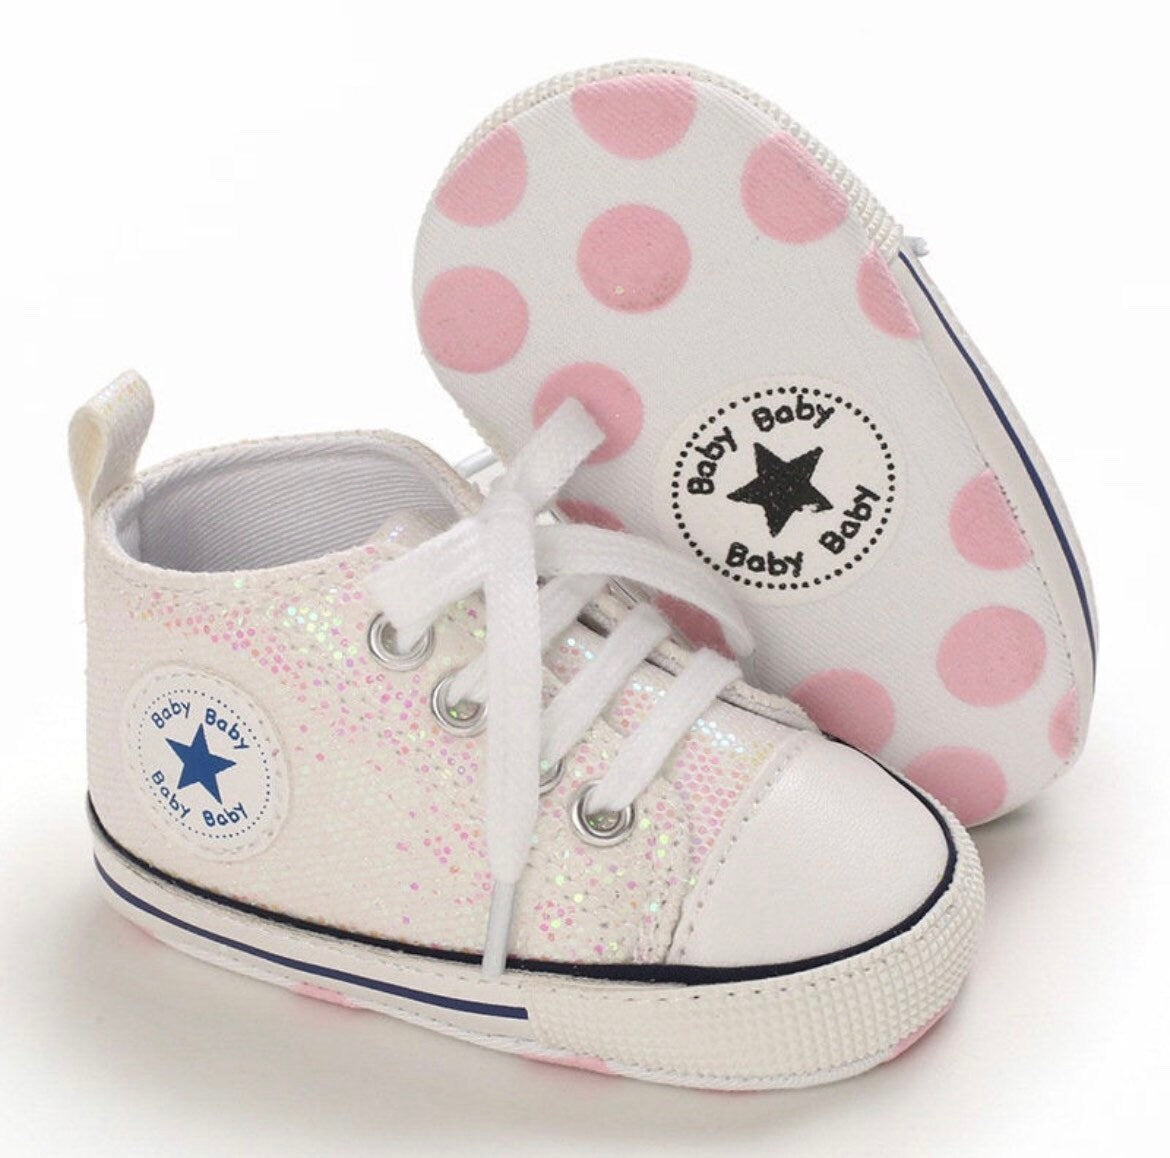 Baby Glitter Sneakers, Like Converse with Shimmer-
 Welcome! Thanks for looking in our shop and viewing these beautiful baby shoes.Your baby will look so adorableIn these smart casual shoes perfect for so many occas-Bijou Bubs